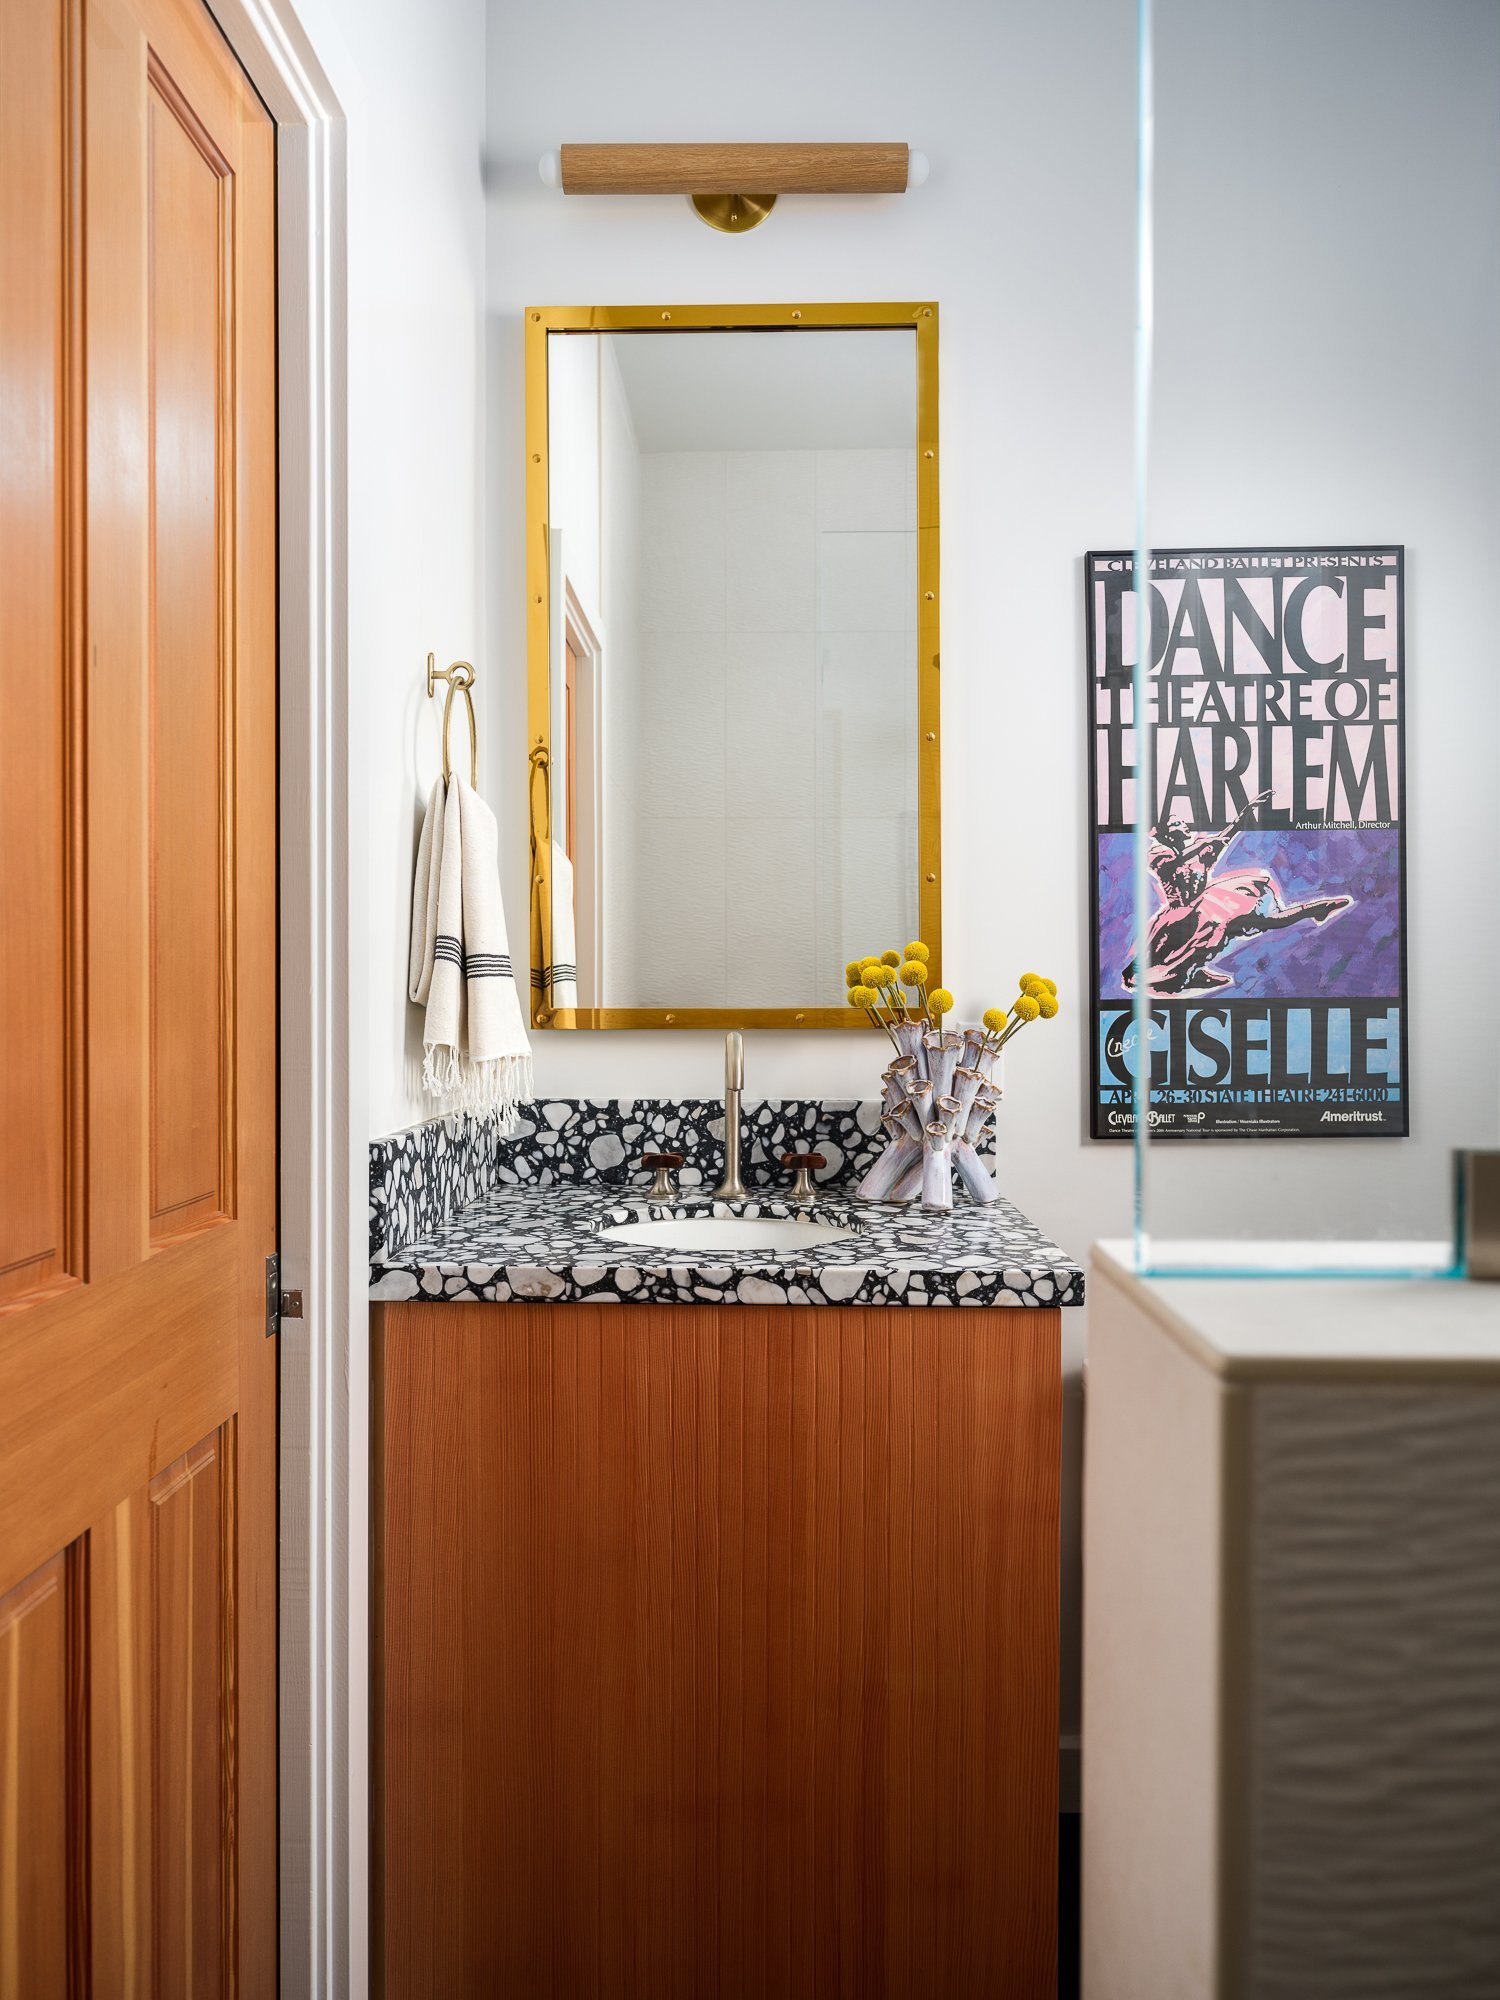  A bathroom with a wooden door and half-wall with glass top enclosing the shower. The vanity cabinet is wood with black and white terrazzo tile countertop and a small circular sink. A gold framed mirror hangs above the sink next to a framed vintage “